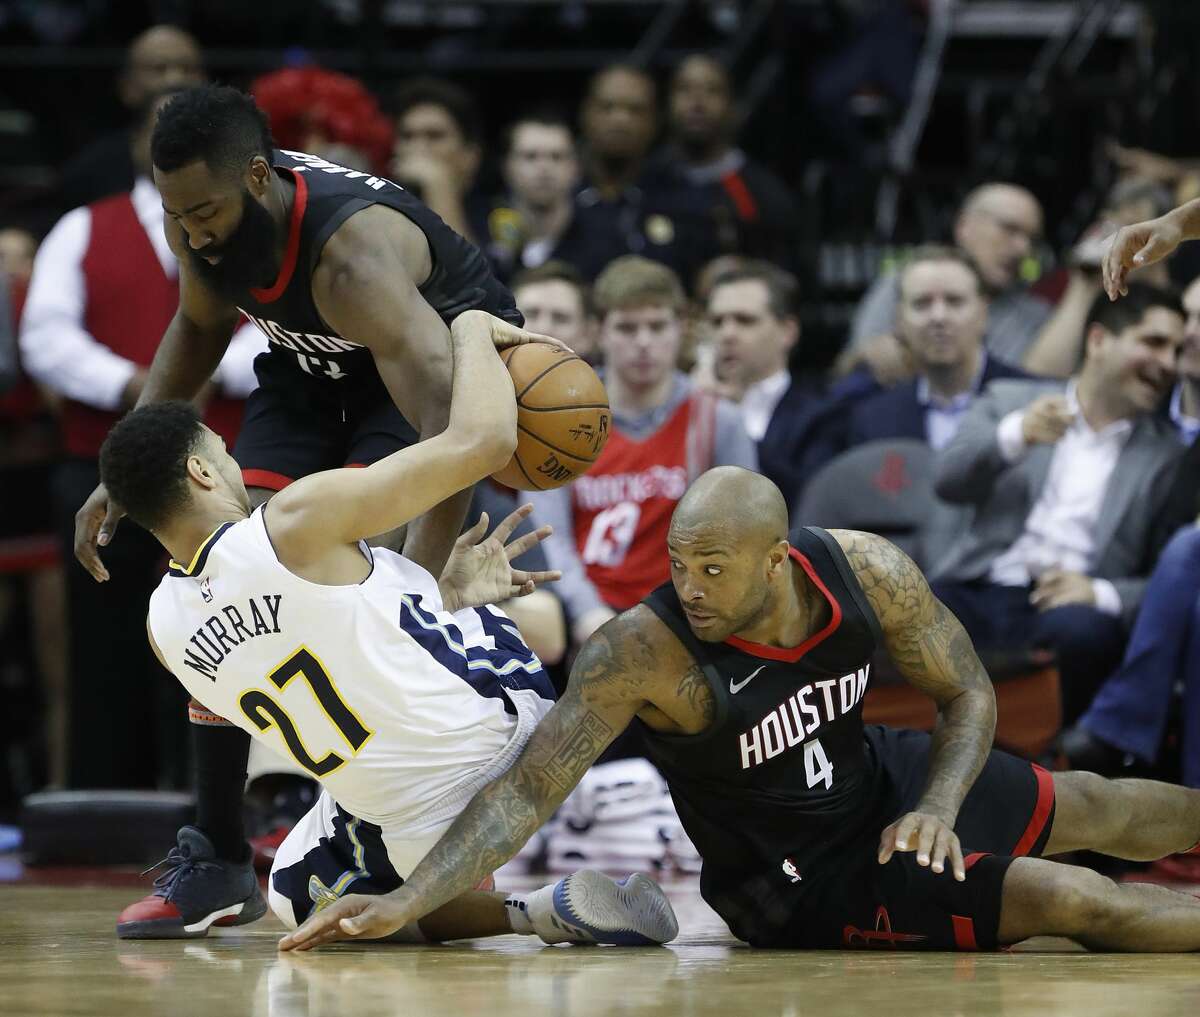 Denver Nuggets guard Jamal Murray (27) collides with Houston Rockets guard James Harden (13) and forward PJ Tucker (4) during the first half of an NBA bassketball game at Toyota Center, Friday, Feb. 9, 2018, in Houston. ( Karen Warren / Houston Chronicle )